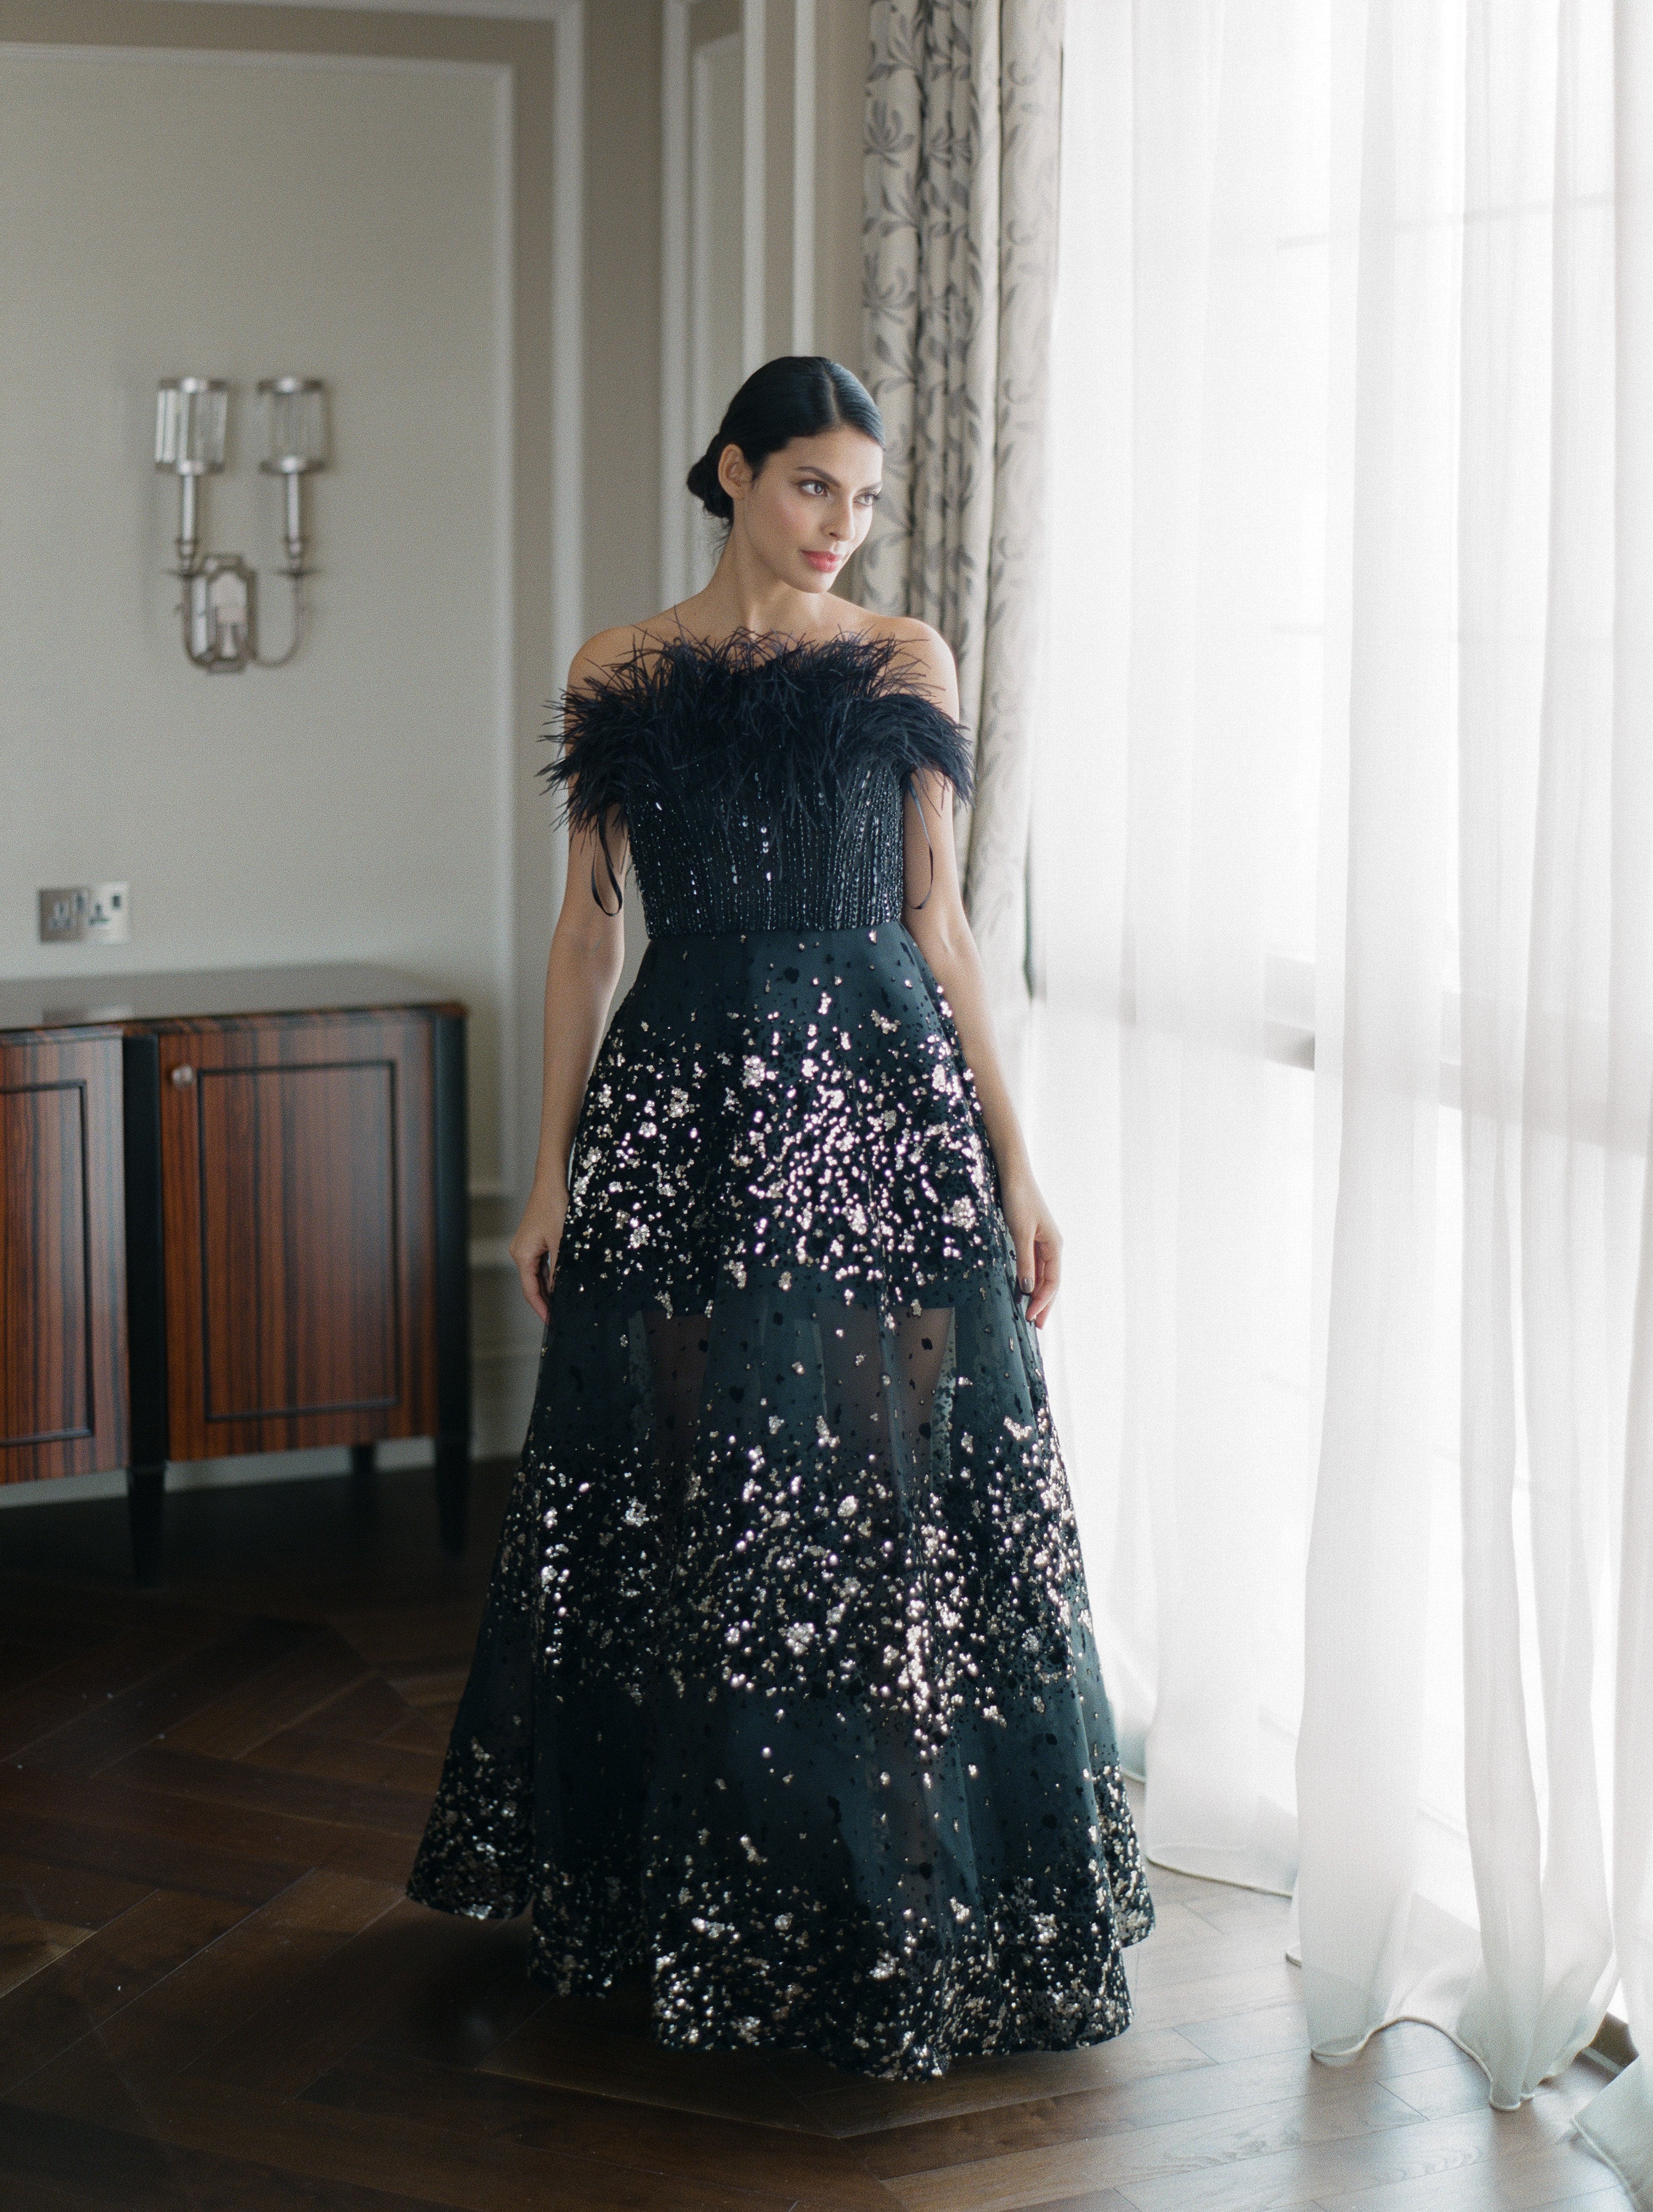 THE BLACK SWAN GOWN (PRE-ORDER) - The Cut 